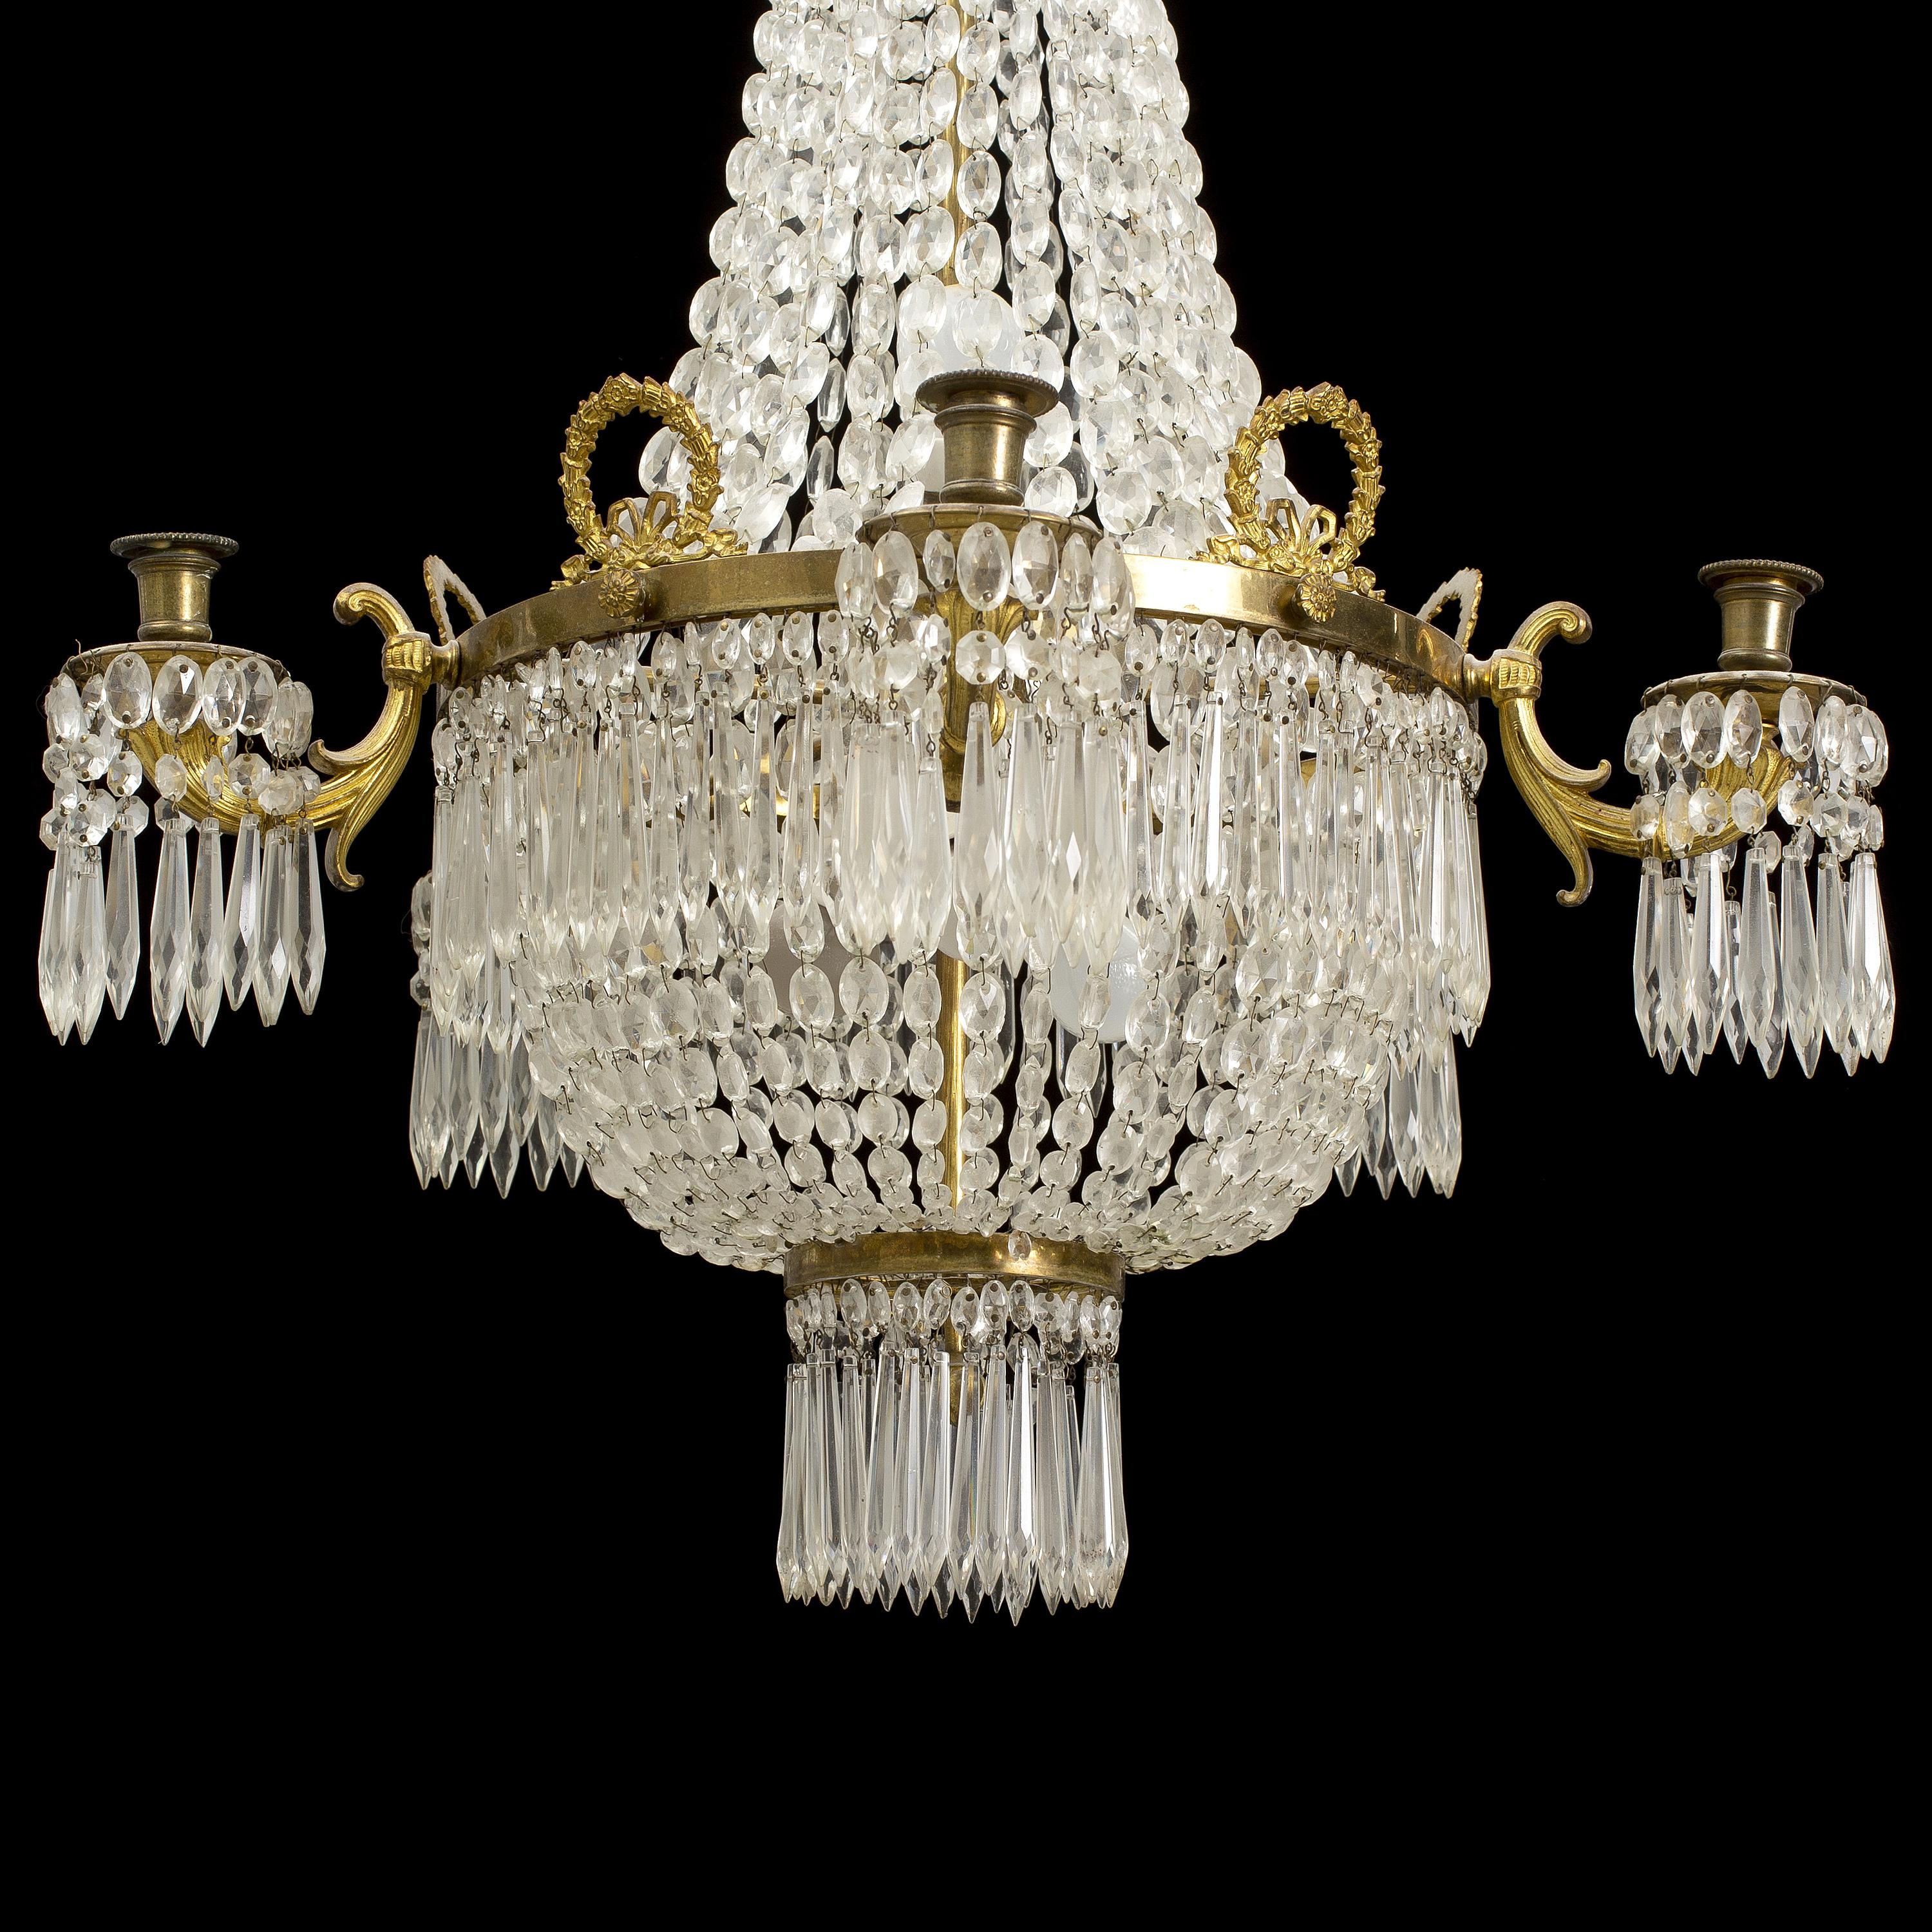 A Scandinavian brass and cut-glass crystal chandelier from the end of the 19th century. It is wired and in excellent condition. Chain not included but if requested we will add chain and canopy.
Measures: Diameter 69, height 105 cm.